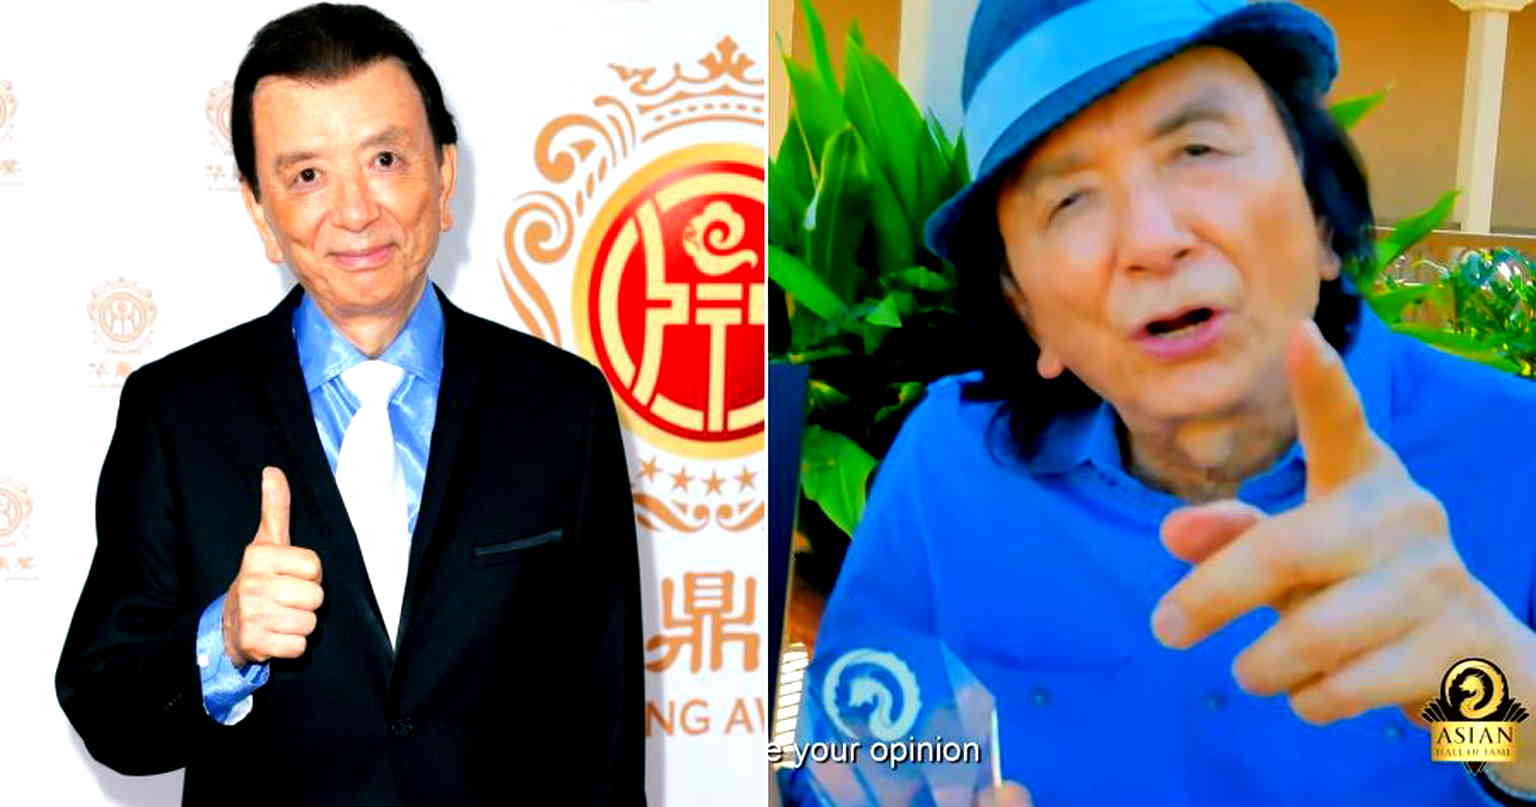 Hollywood Legend James Hong Inducted Into the Asian Hall of Fame